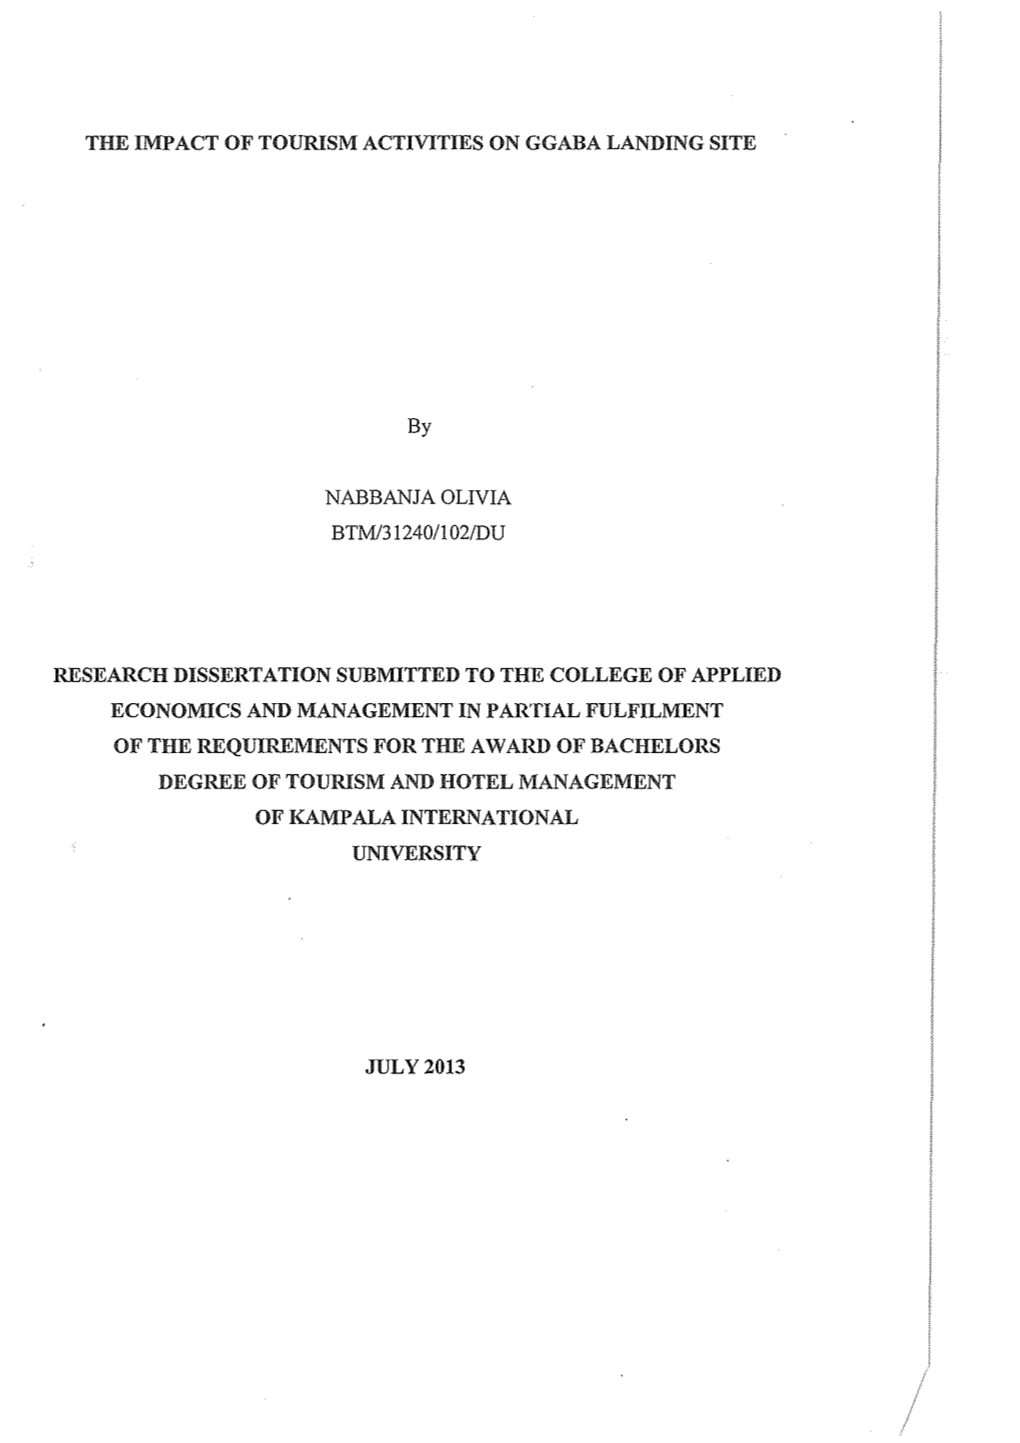 THE IMPACT of TOURISM ACTIVITIES on GGABA LANDING SITE by NABBANJA OLIVIA BTM/31240/102/DU RESEARCH DISSERTATION SUBMITTED to TH